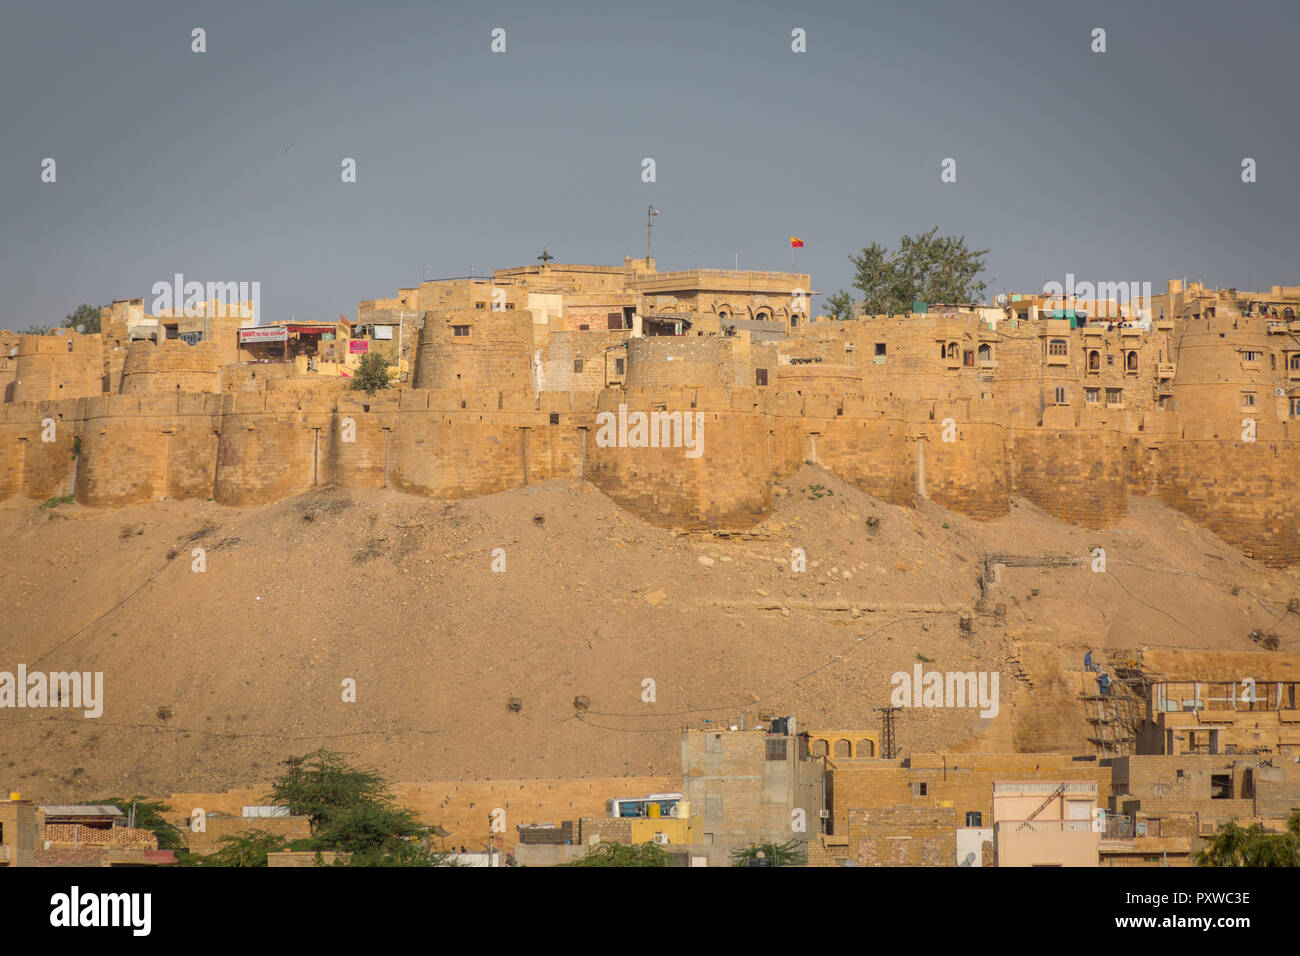 Distant view of the Jaisalmer Fort int he desert state of Rajasthan in western India Stock Photo